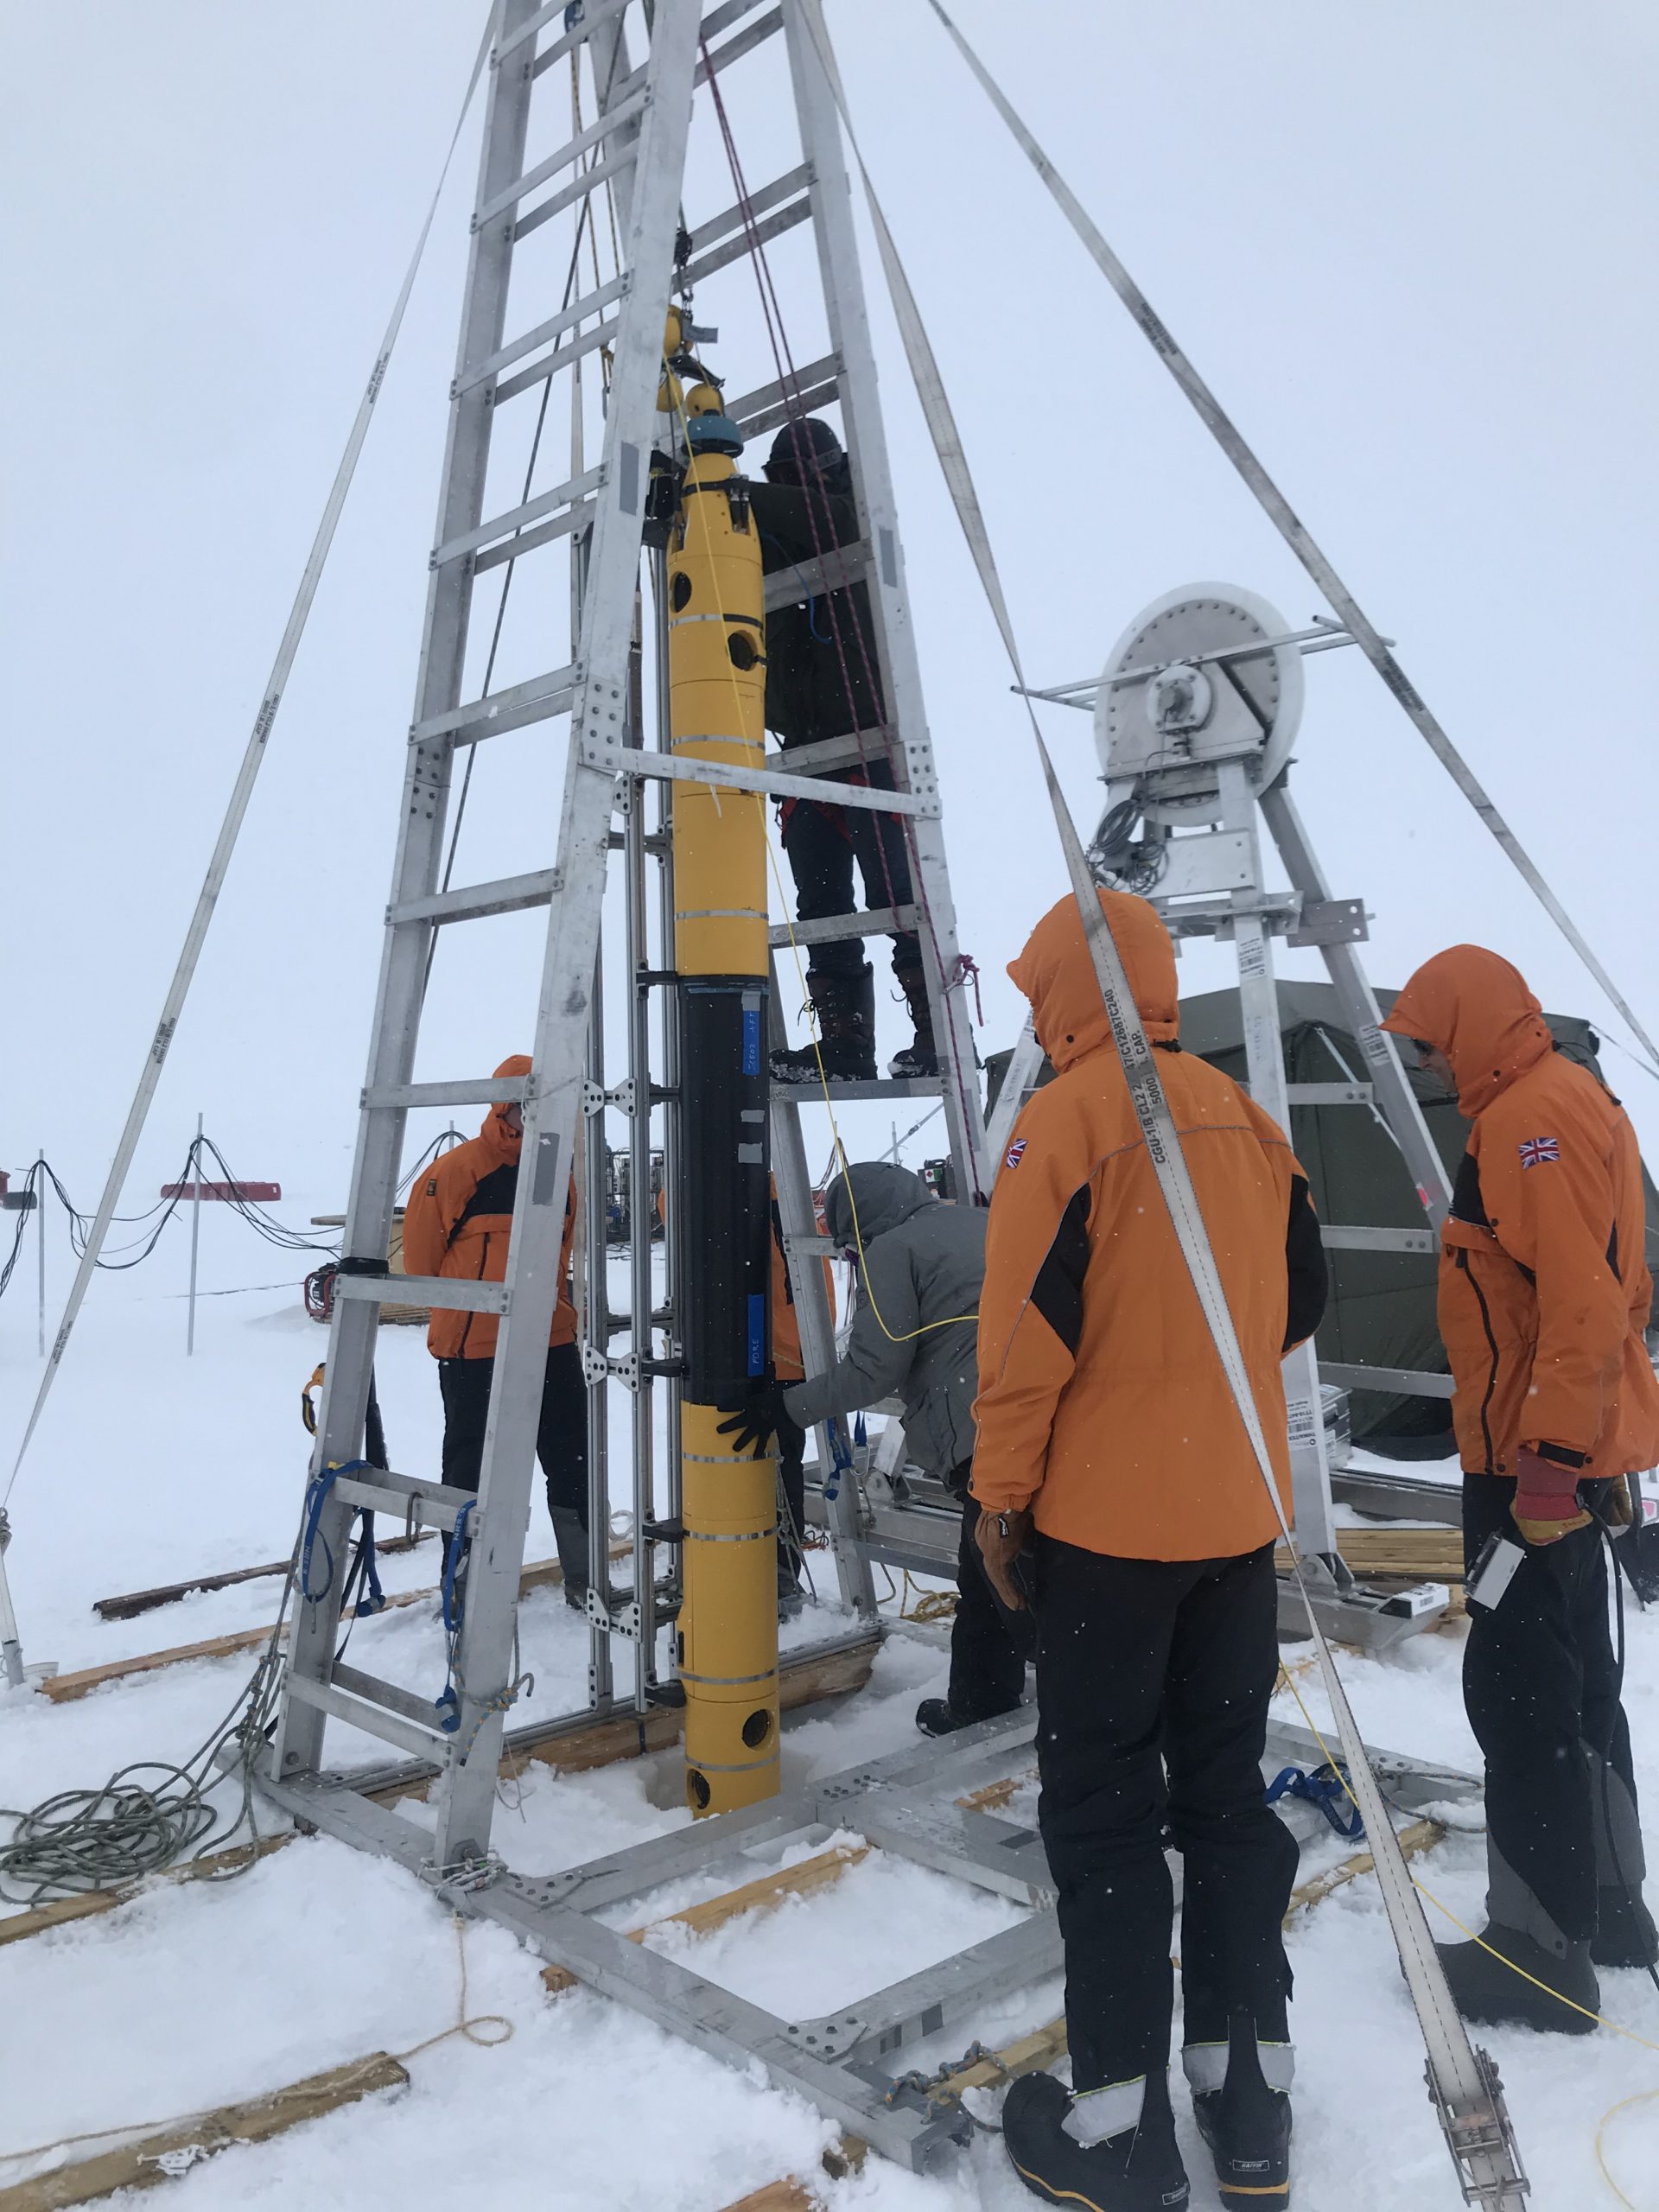 Icefin team members and BAS team assess Icefin deployment.